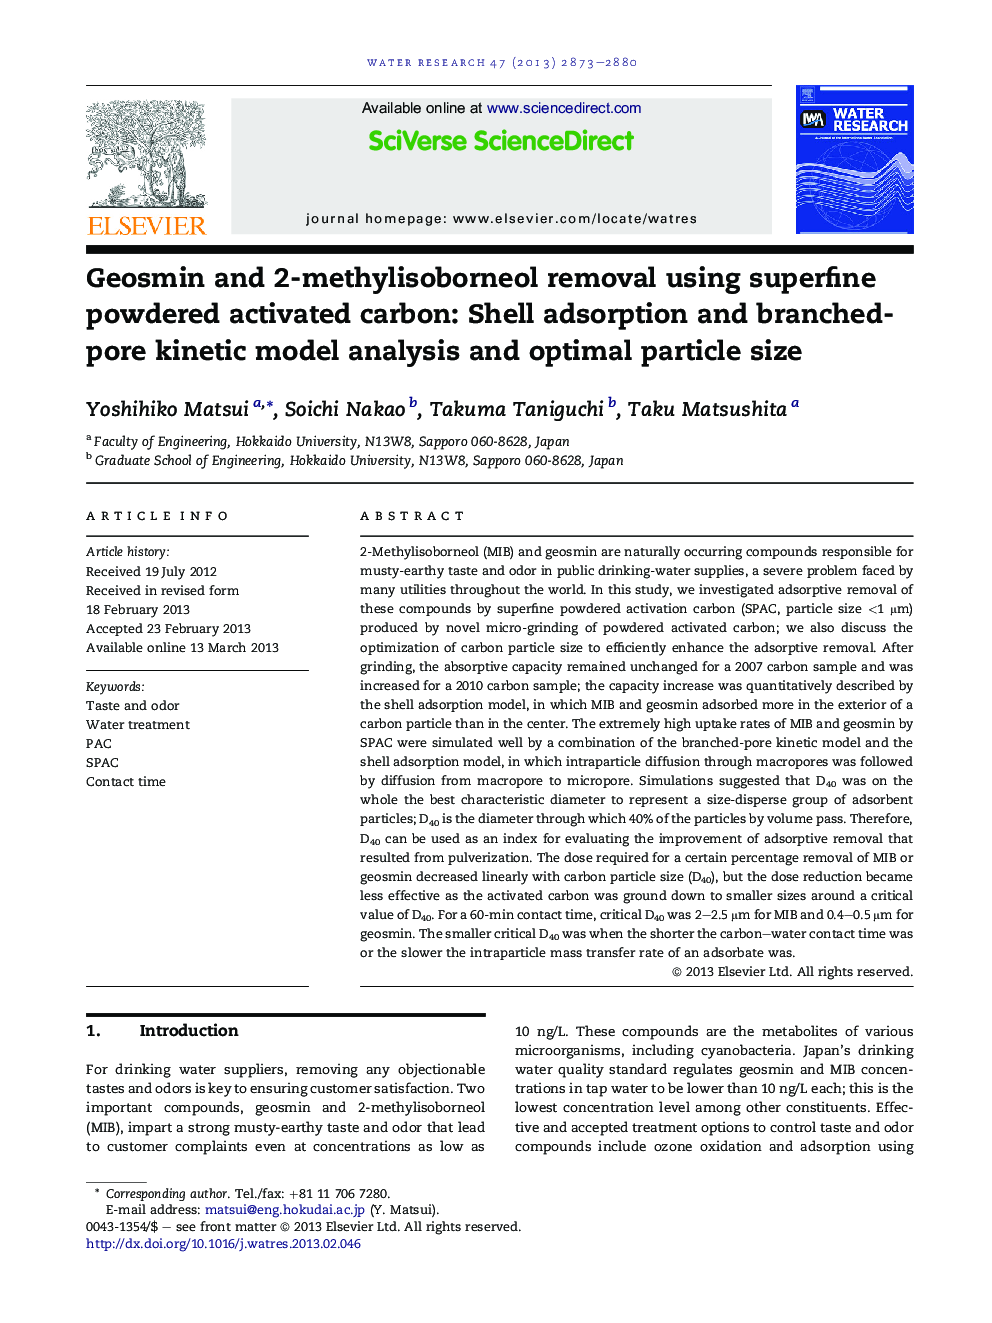 Geosmin and 2-methylisoborneol removal using superfine powdered activated carbon: Shell adsorption and branched-pore kinetic model analysis and optimal particle size